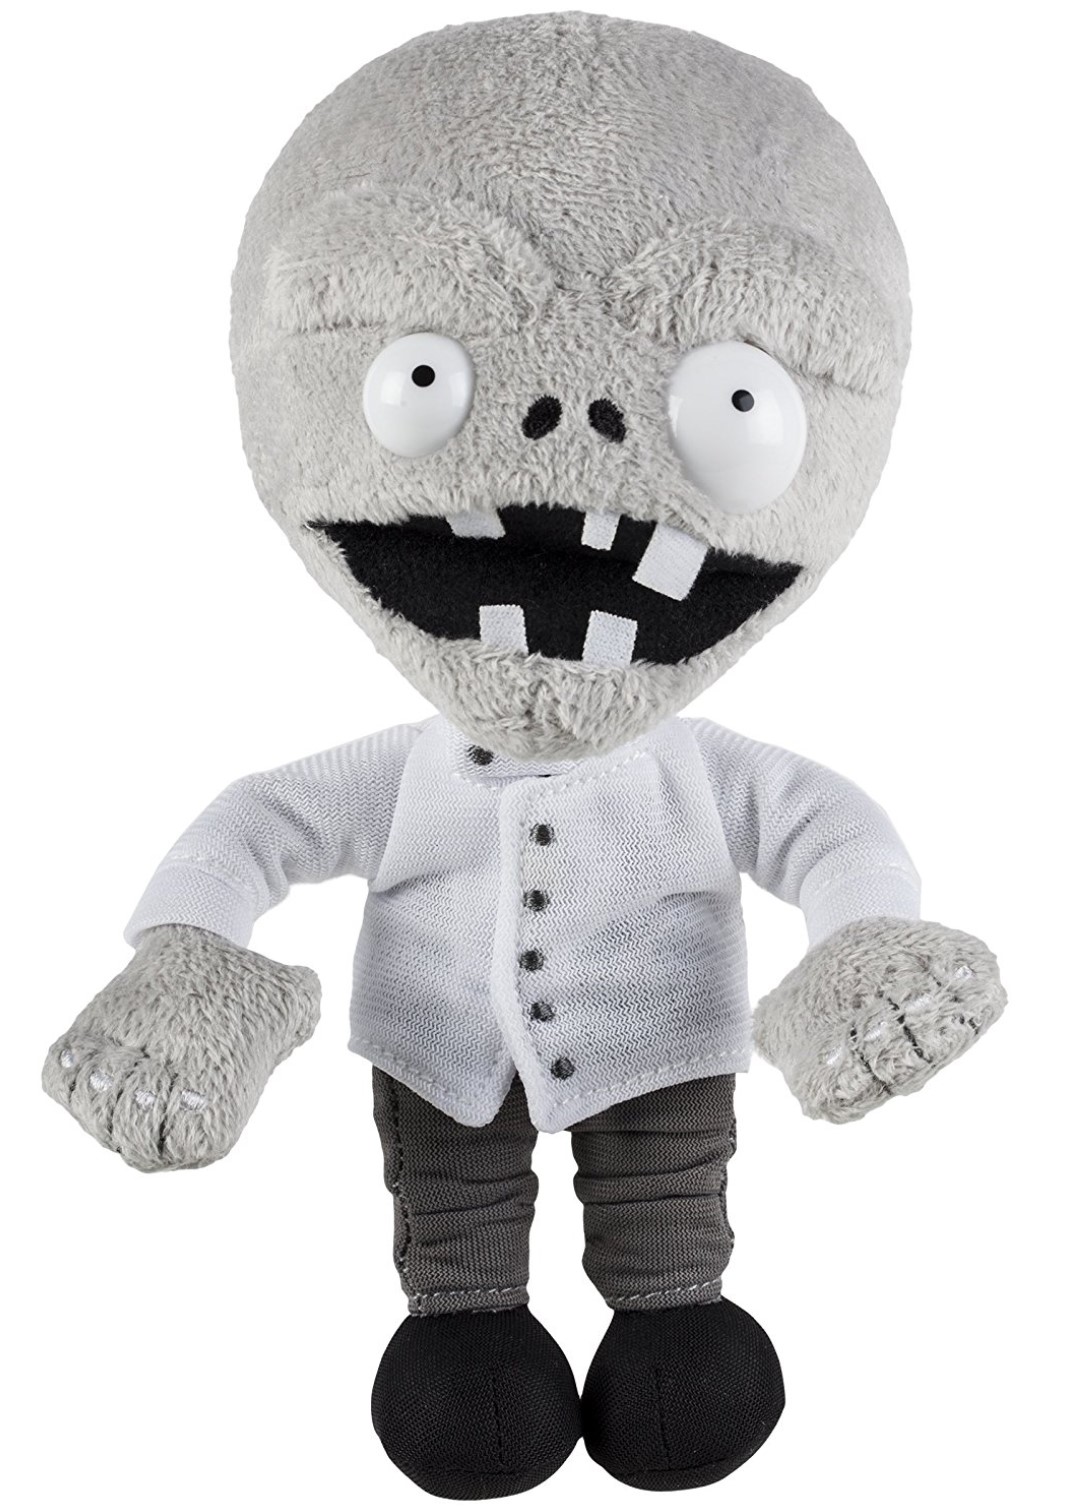 Discuss Everything About Plants vs Zombies Plush Wiki | Fandom